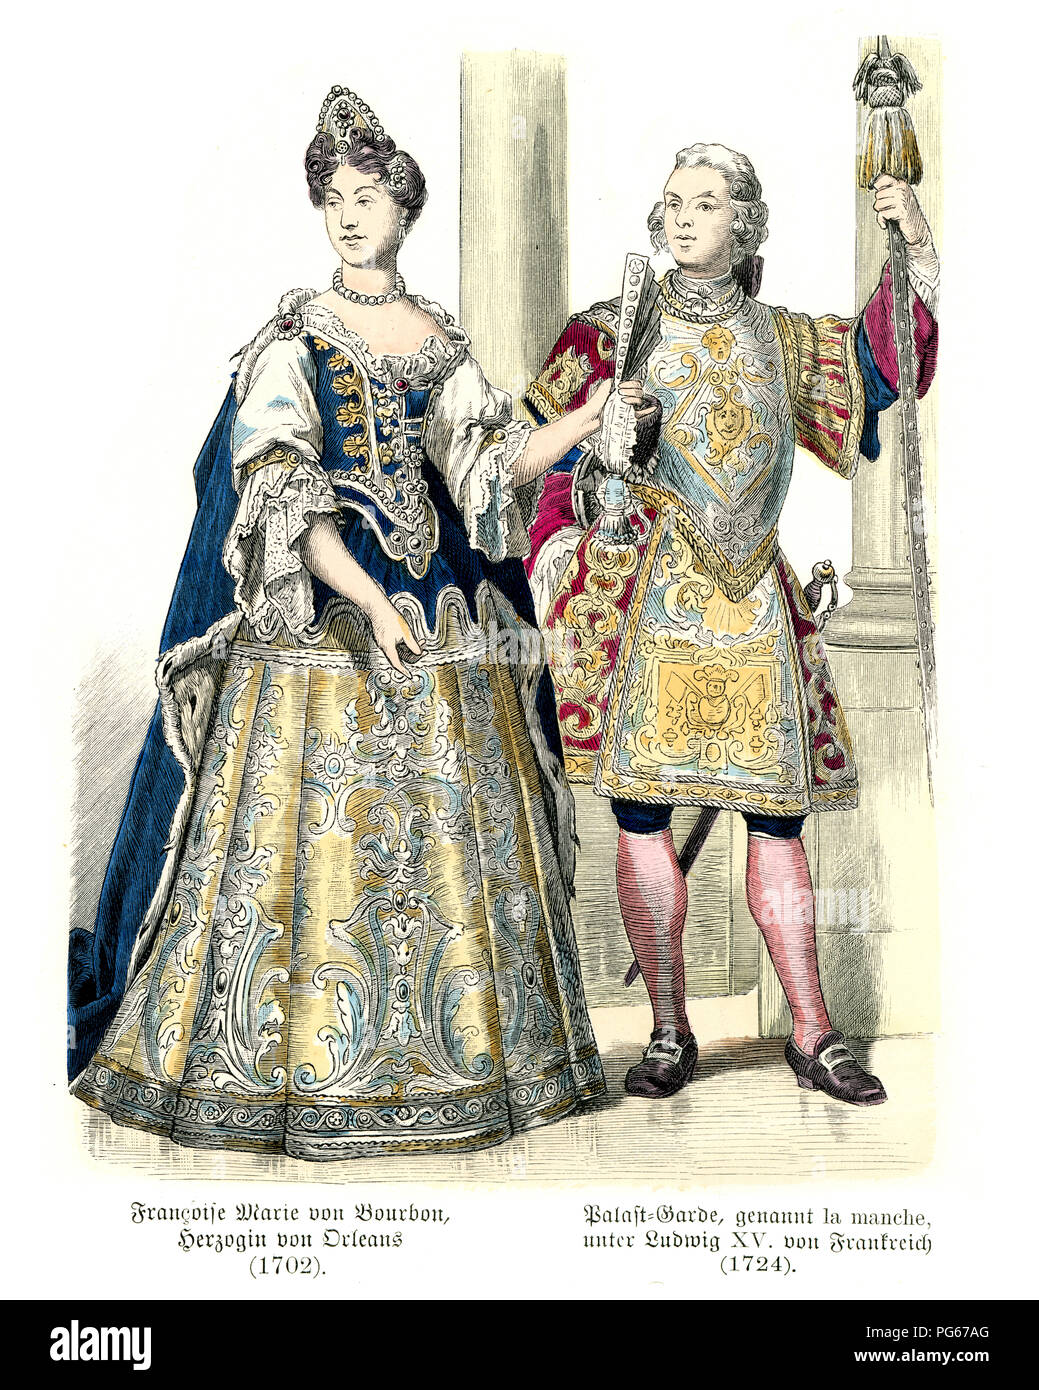 Fashion of 18th Century France, Francoise Mary of Bourbon, Duchess of Orleans, 1702 and Palace guards under Louis XV, 1724 Stock Photo